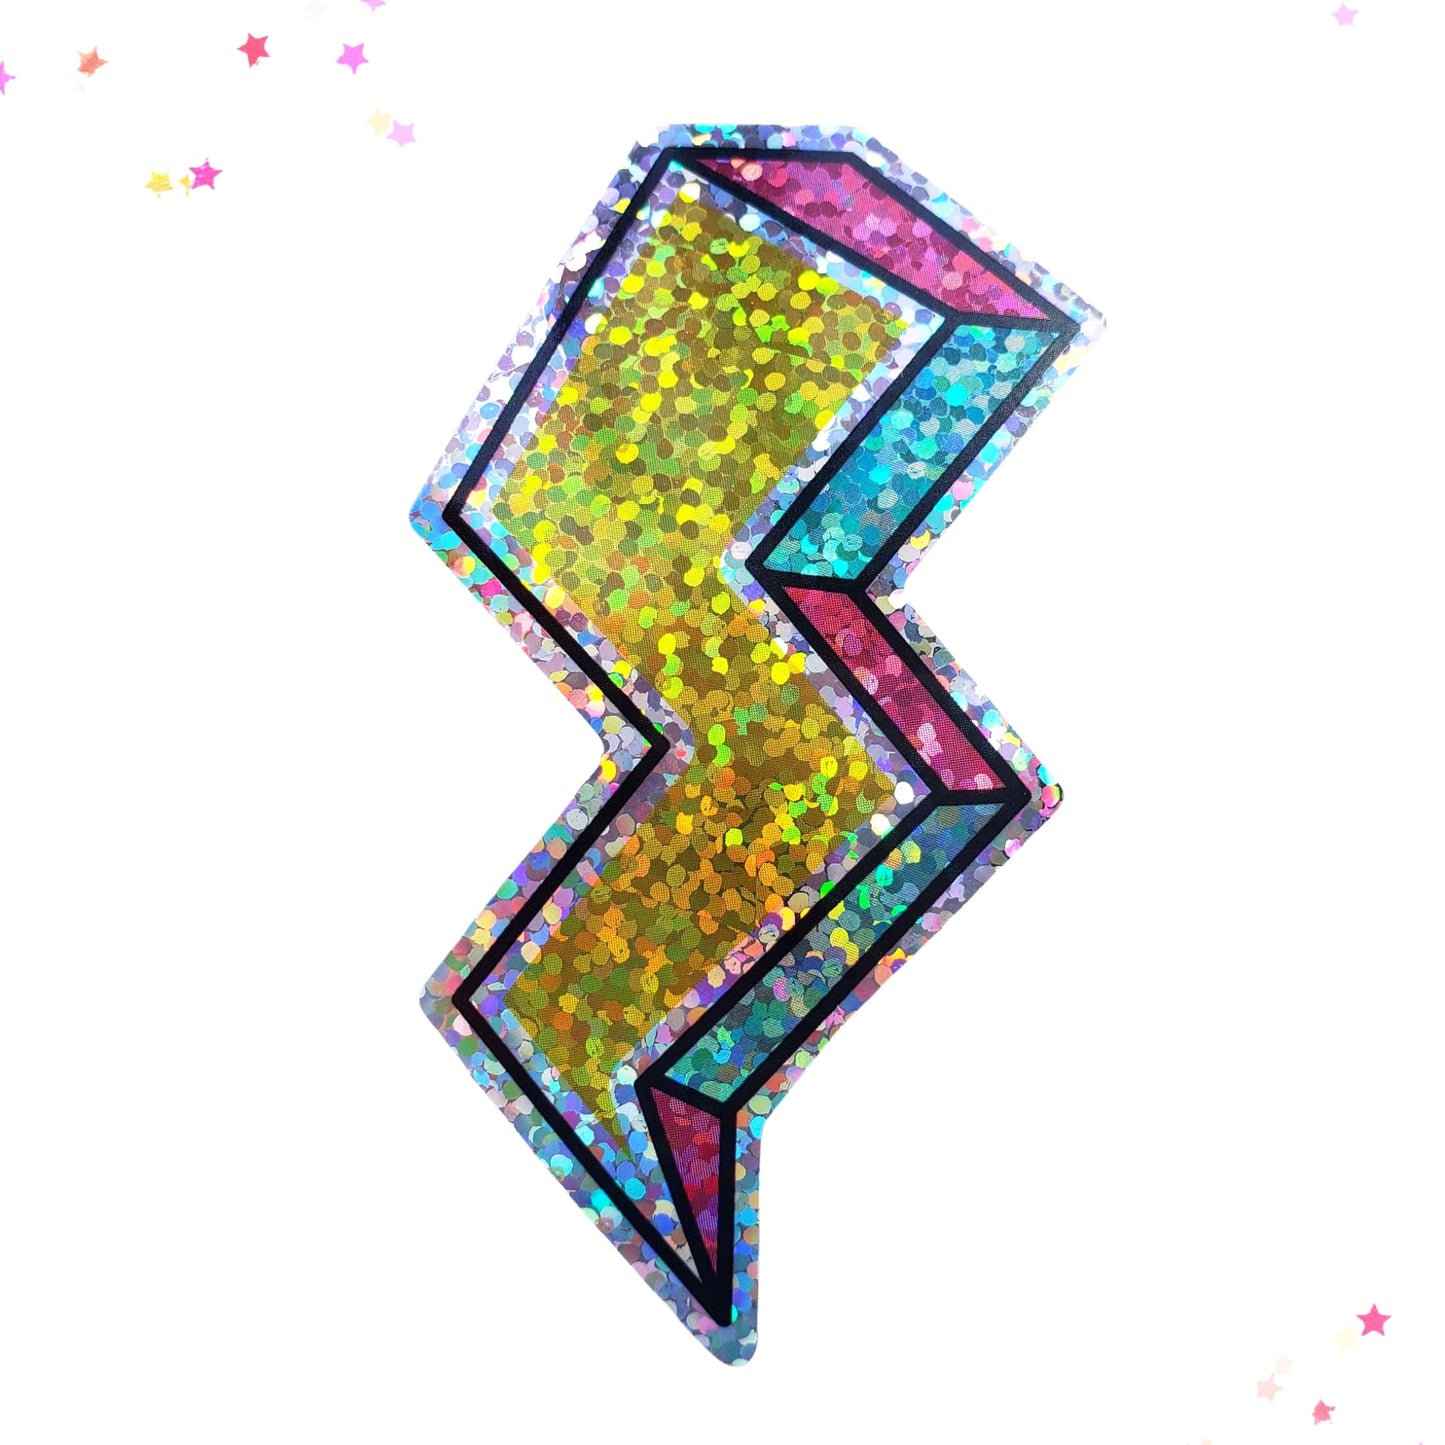 Premium Sticker - Sparkly Holographic Glitter Lightning Bolt from Confetti Kitty, Only 2.00